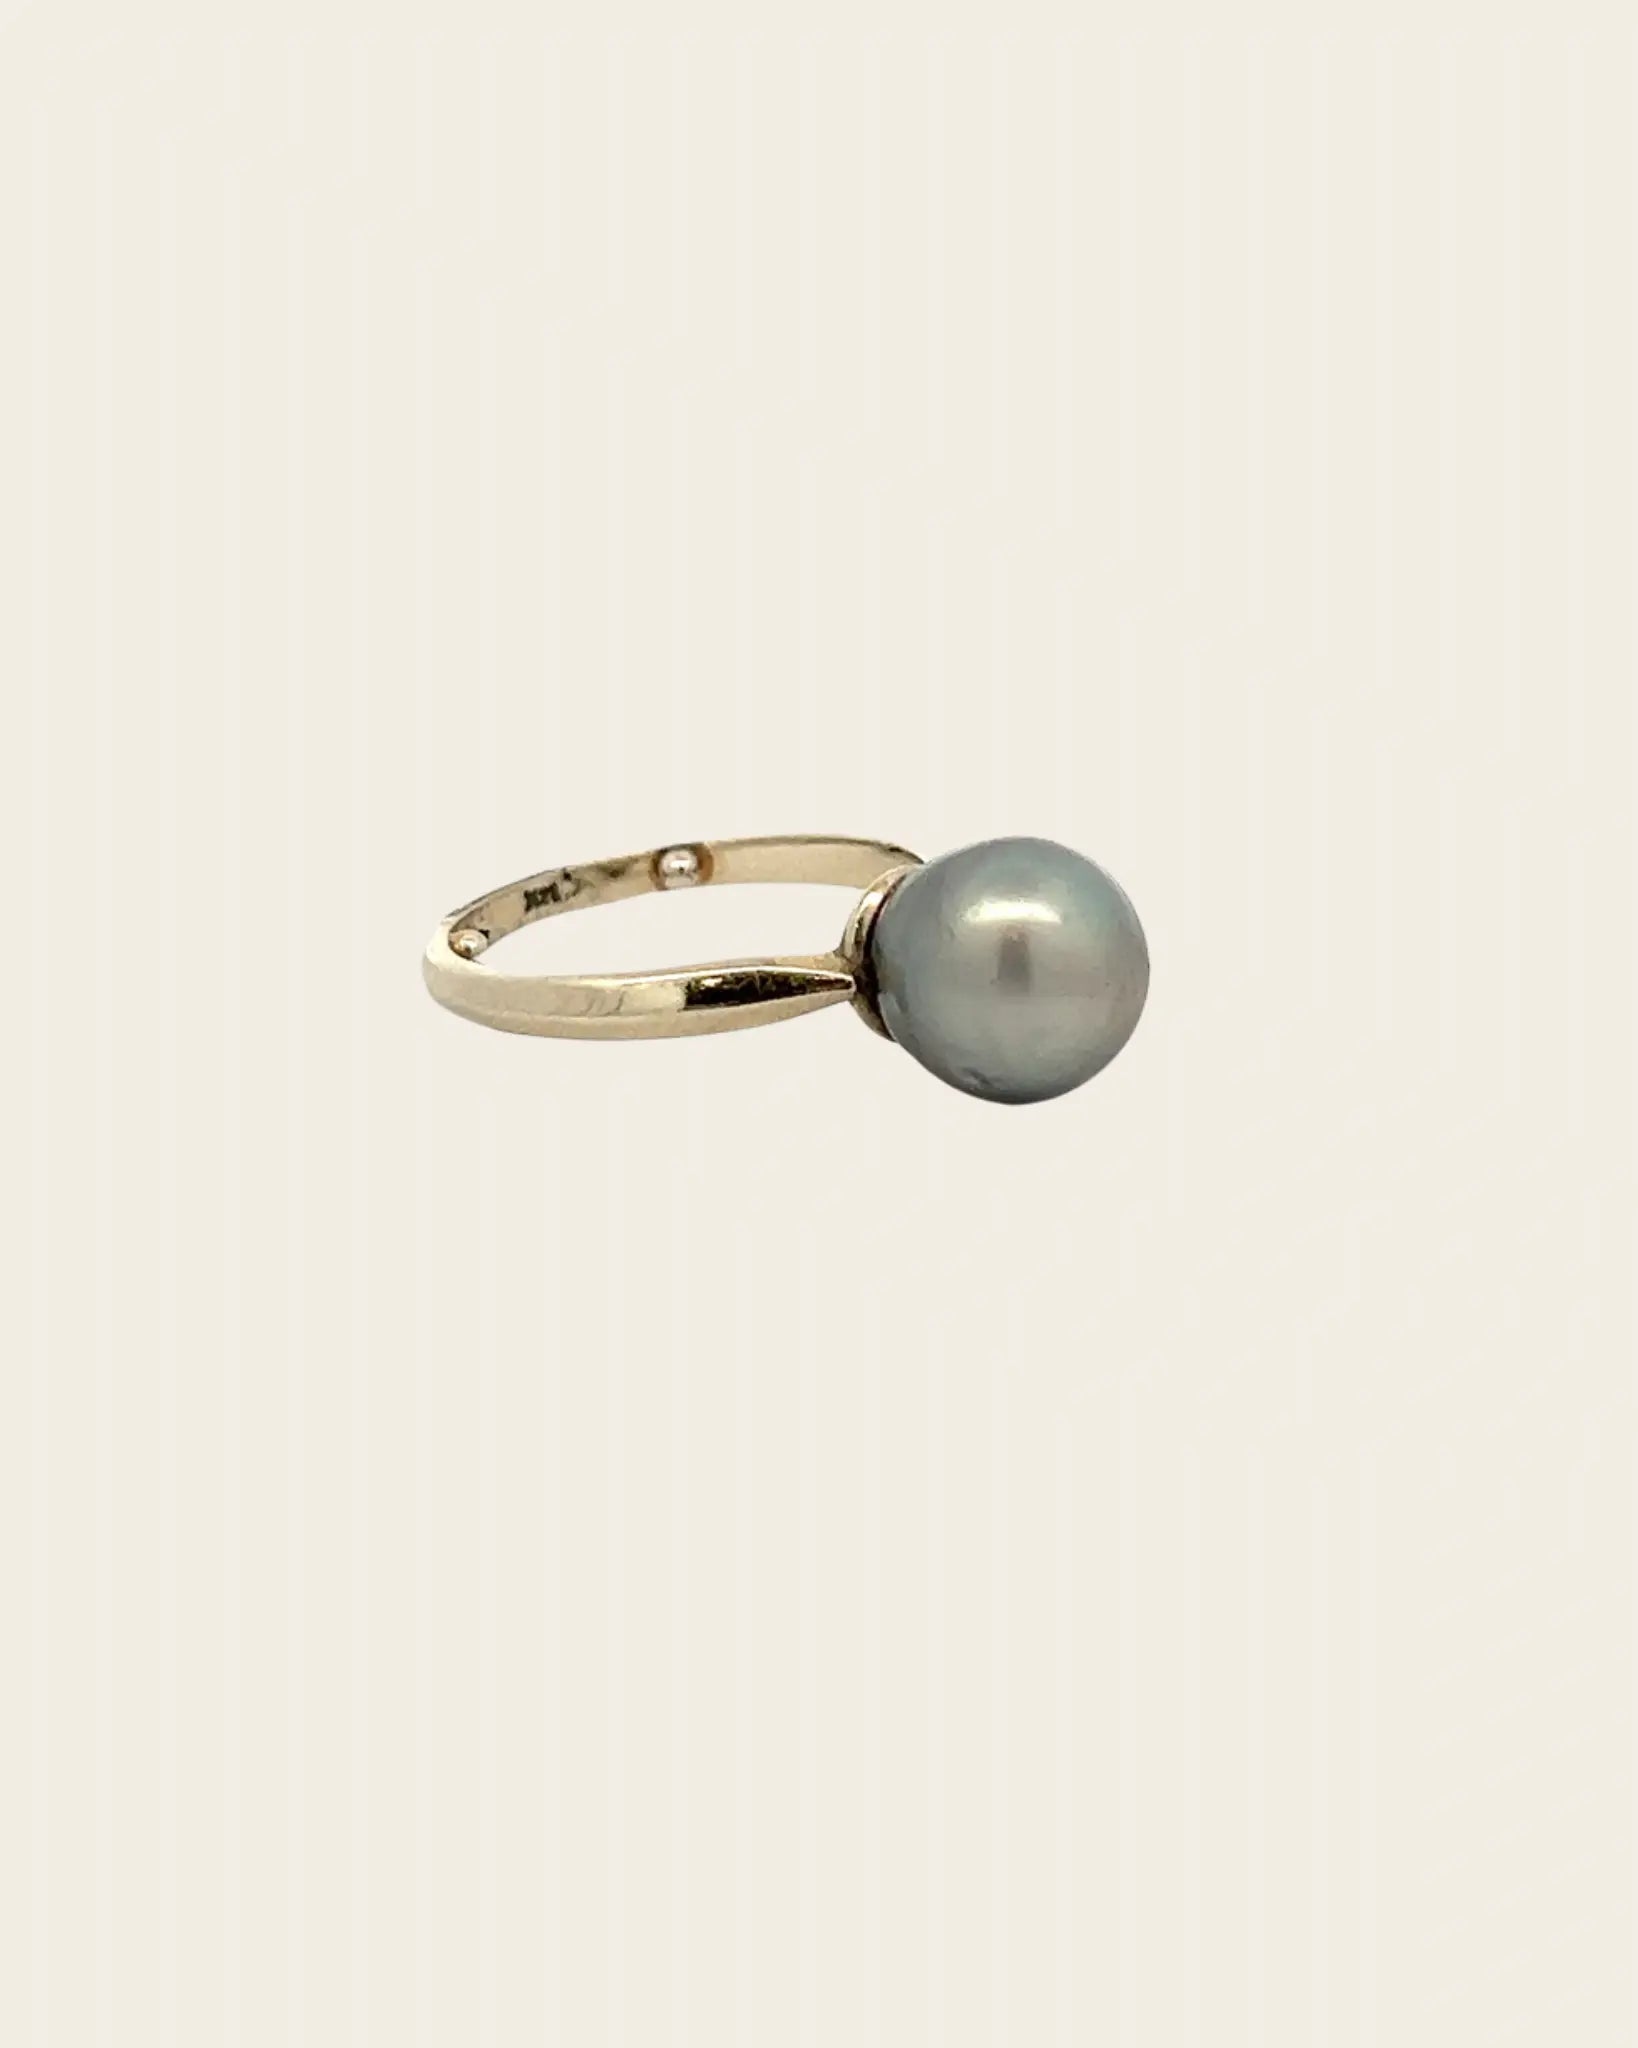 Tahitian Cultured Pearl Ring Tahitian Cultured Pearl Ring Vintage at the Squash Blossom Vintage at the Squash Blossom  Squash Blossom Vail